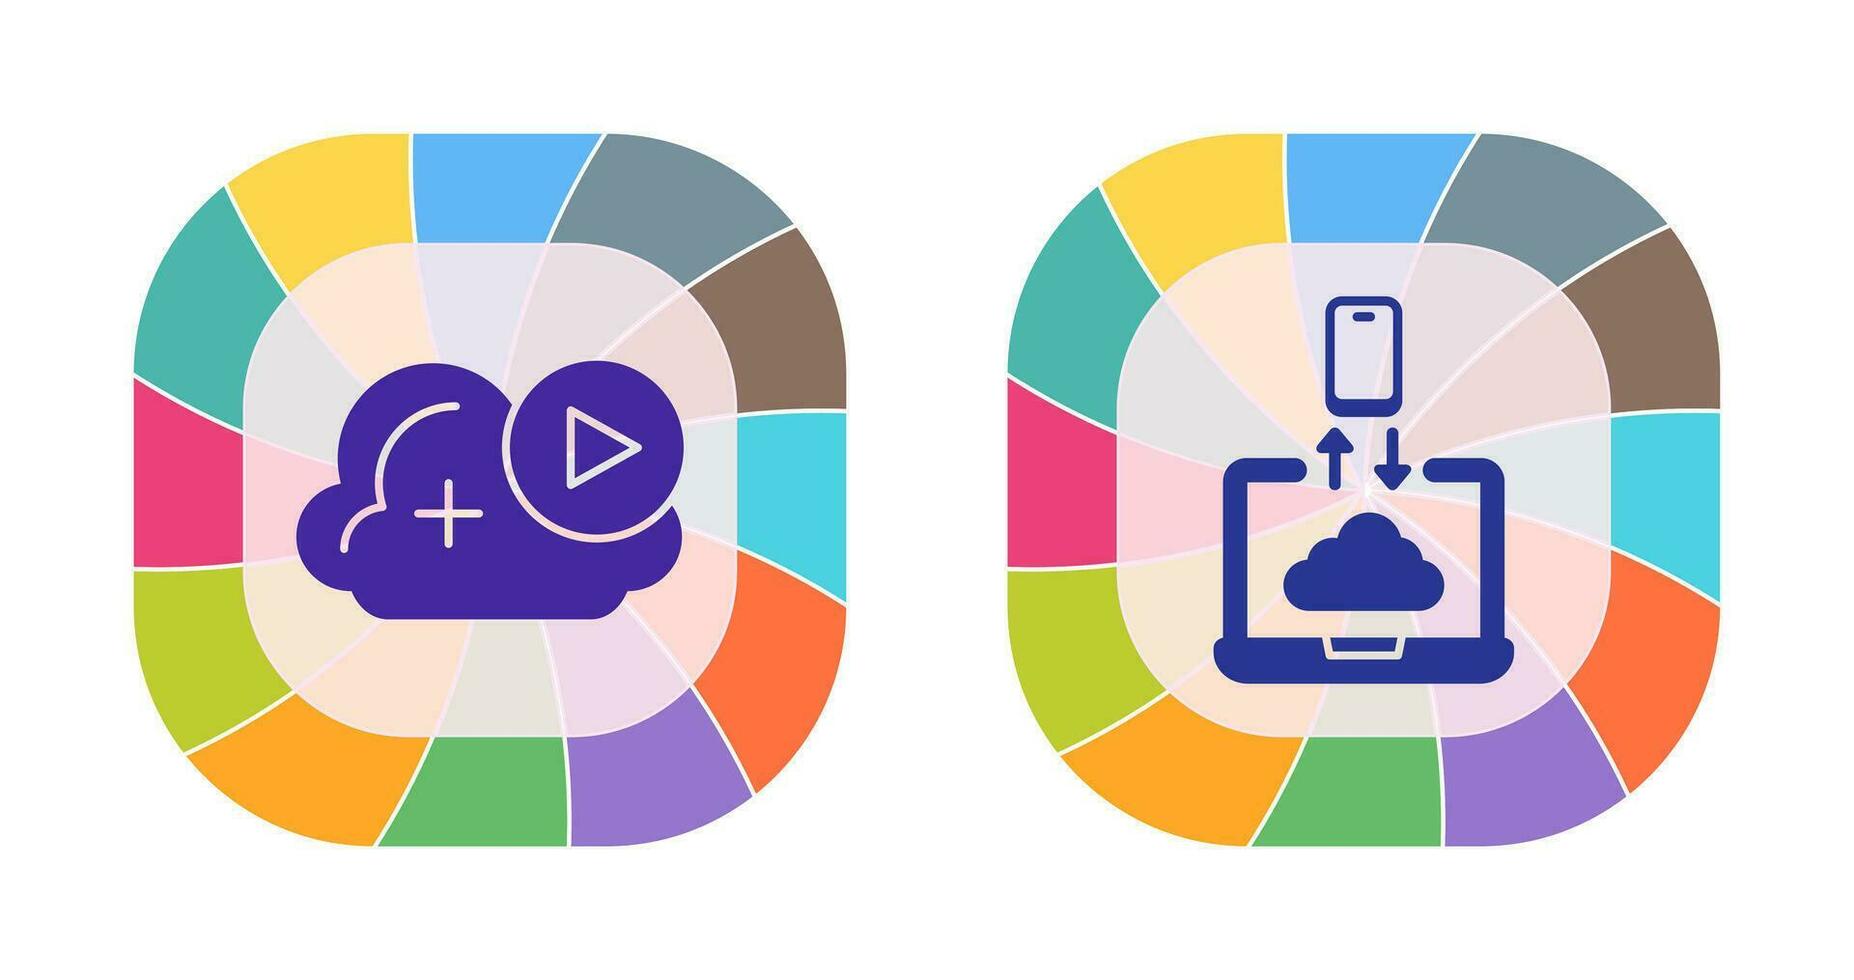 Video and Data Transfer Icon vector